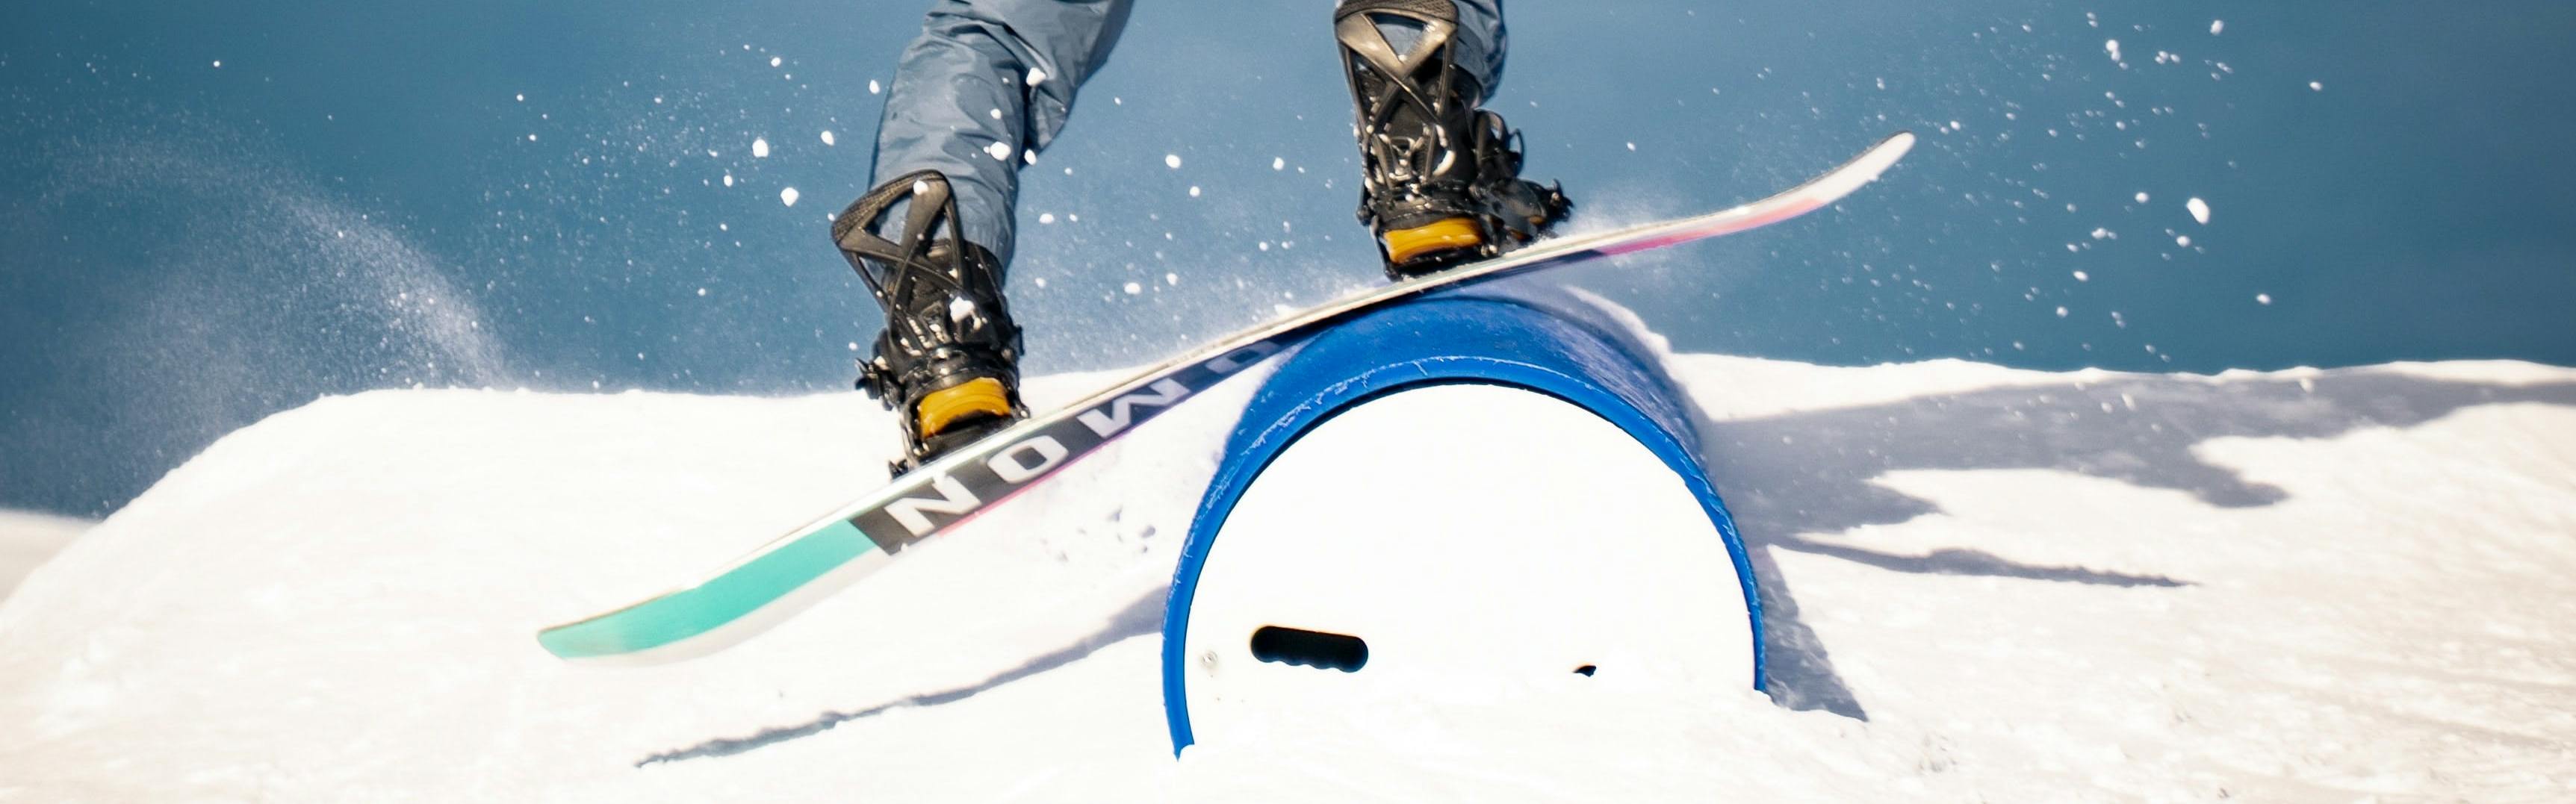 The Best Snowboards for Rails | Curated.com